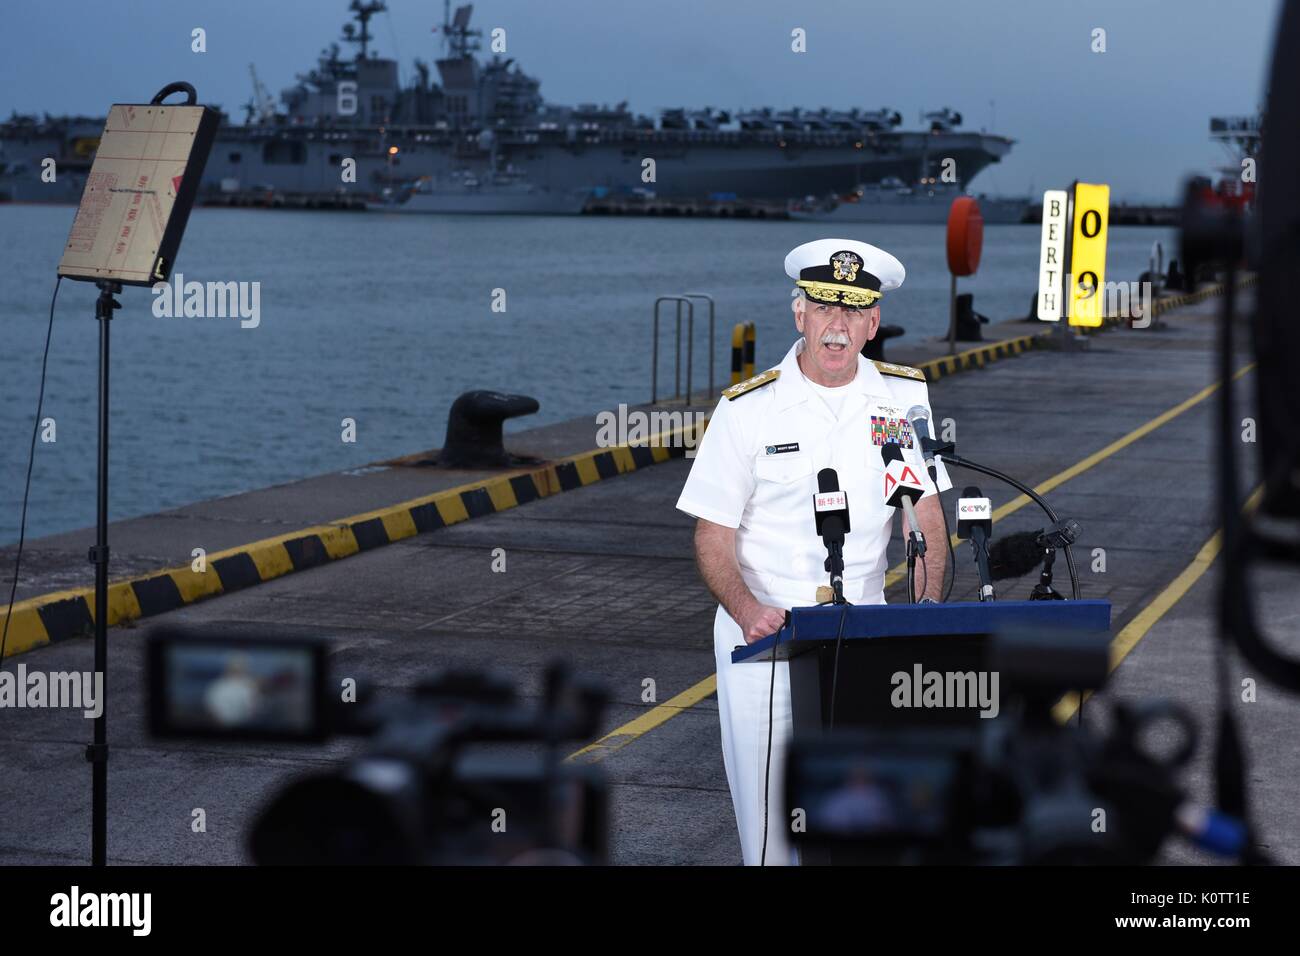 U.S. Adm. Scott Swift, commander of U.S. Pacific Fleet, speaks to news media at Changi Naval Base following the collision of the USS John S. McCain with a civilian tanker ship August 22, 2017 in Singapore. The guided-missile destroyer sustained significant damage while underway east of the Strait of Malacca resulting in ten sailors missing and believed dead. Stock Photo